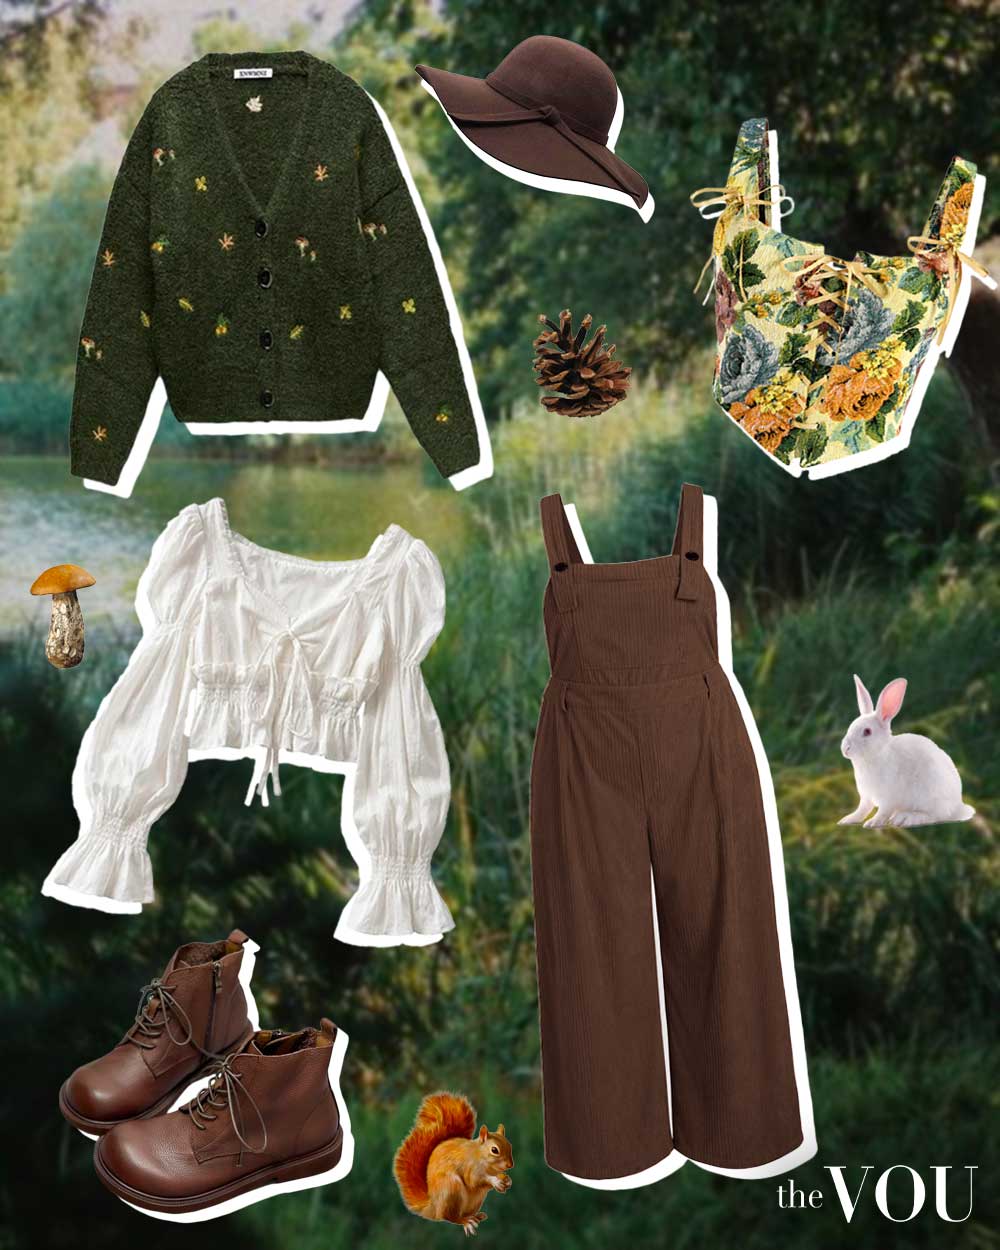 10 Cottagecore Outfit Ideas to Dress in a Rural-Romantic Style - Fashnfly